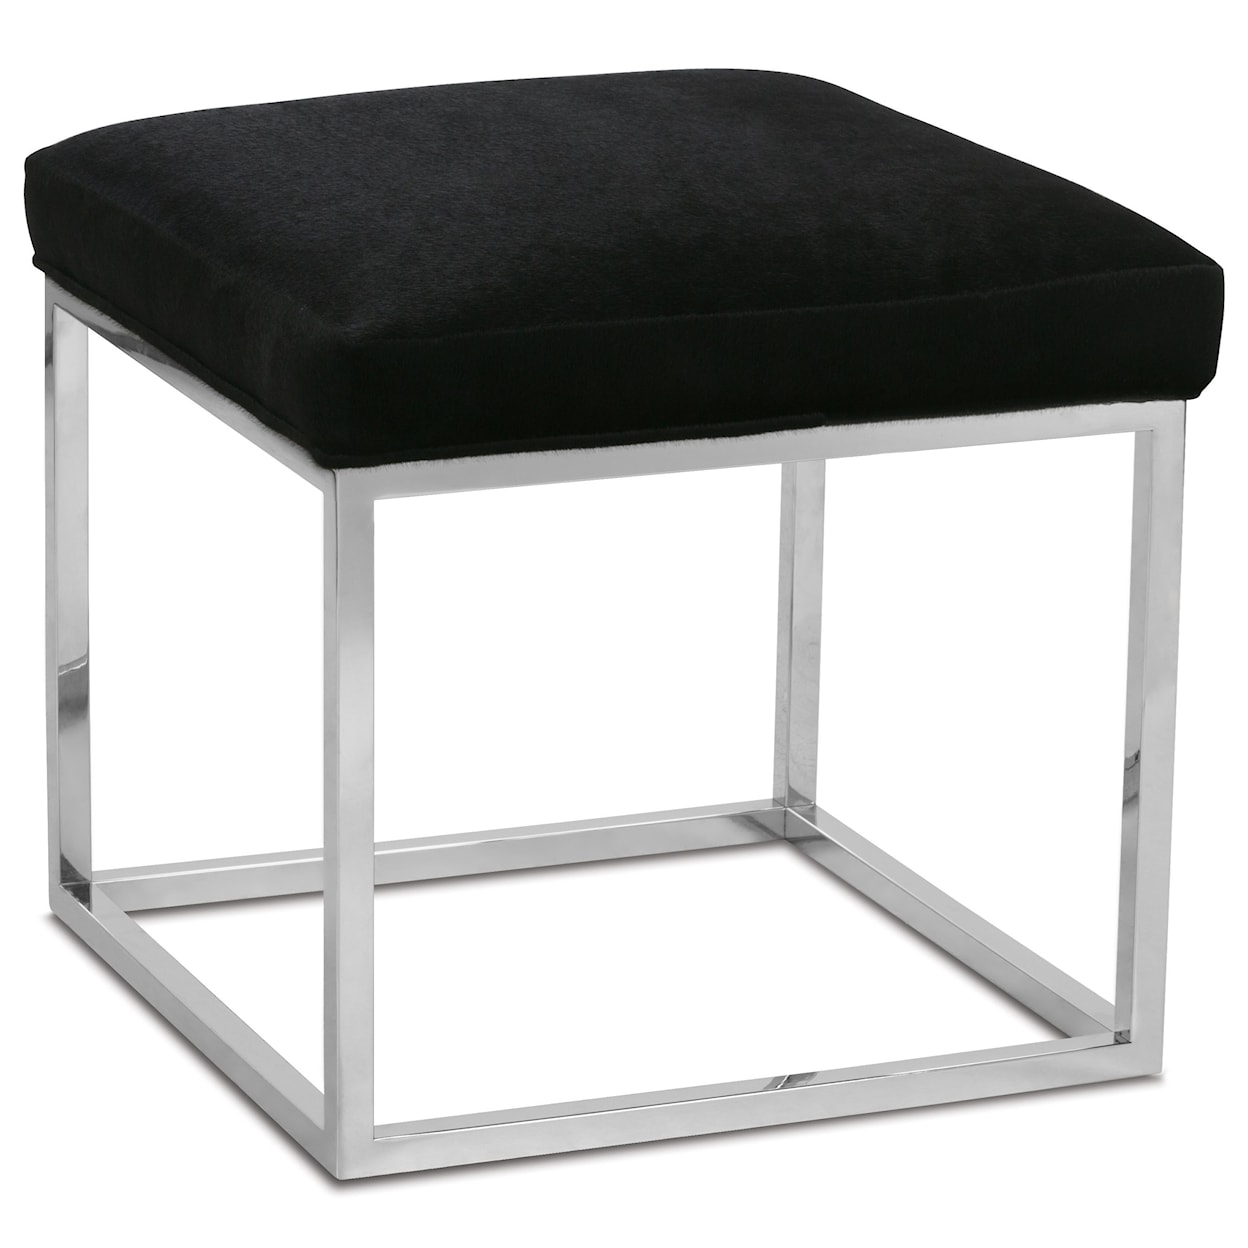 Rowe Percy Contemporary Accent Cube Ottoman